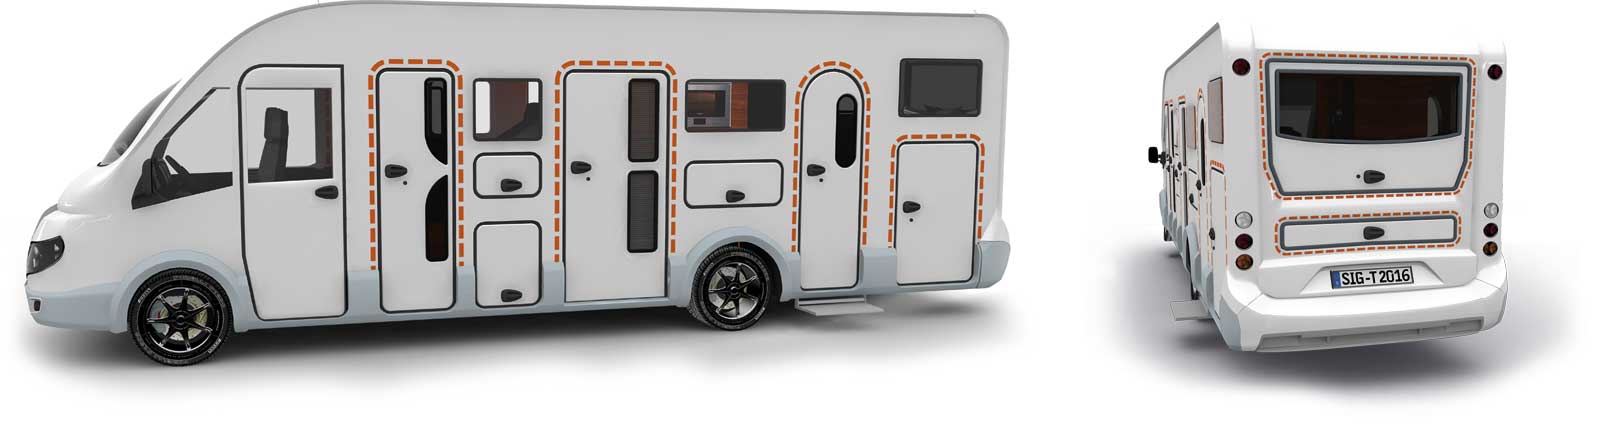 Satisfied tegos customers with PhoeniX caravans and RVs